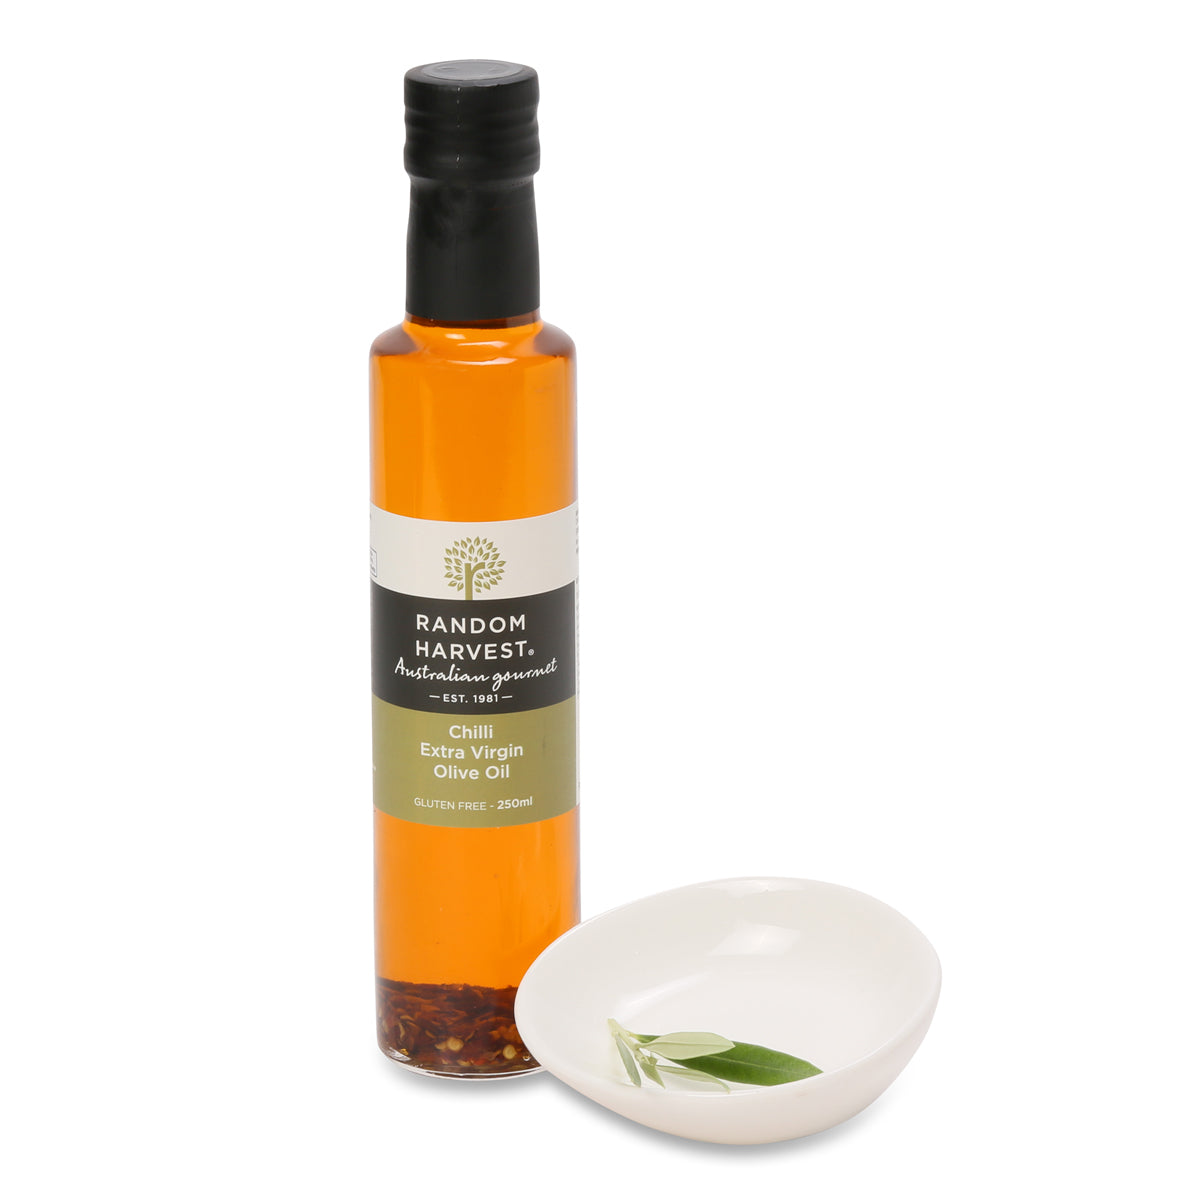 Chilli Infused Olive Oil Dipping set